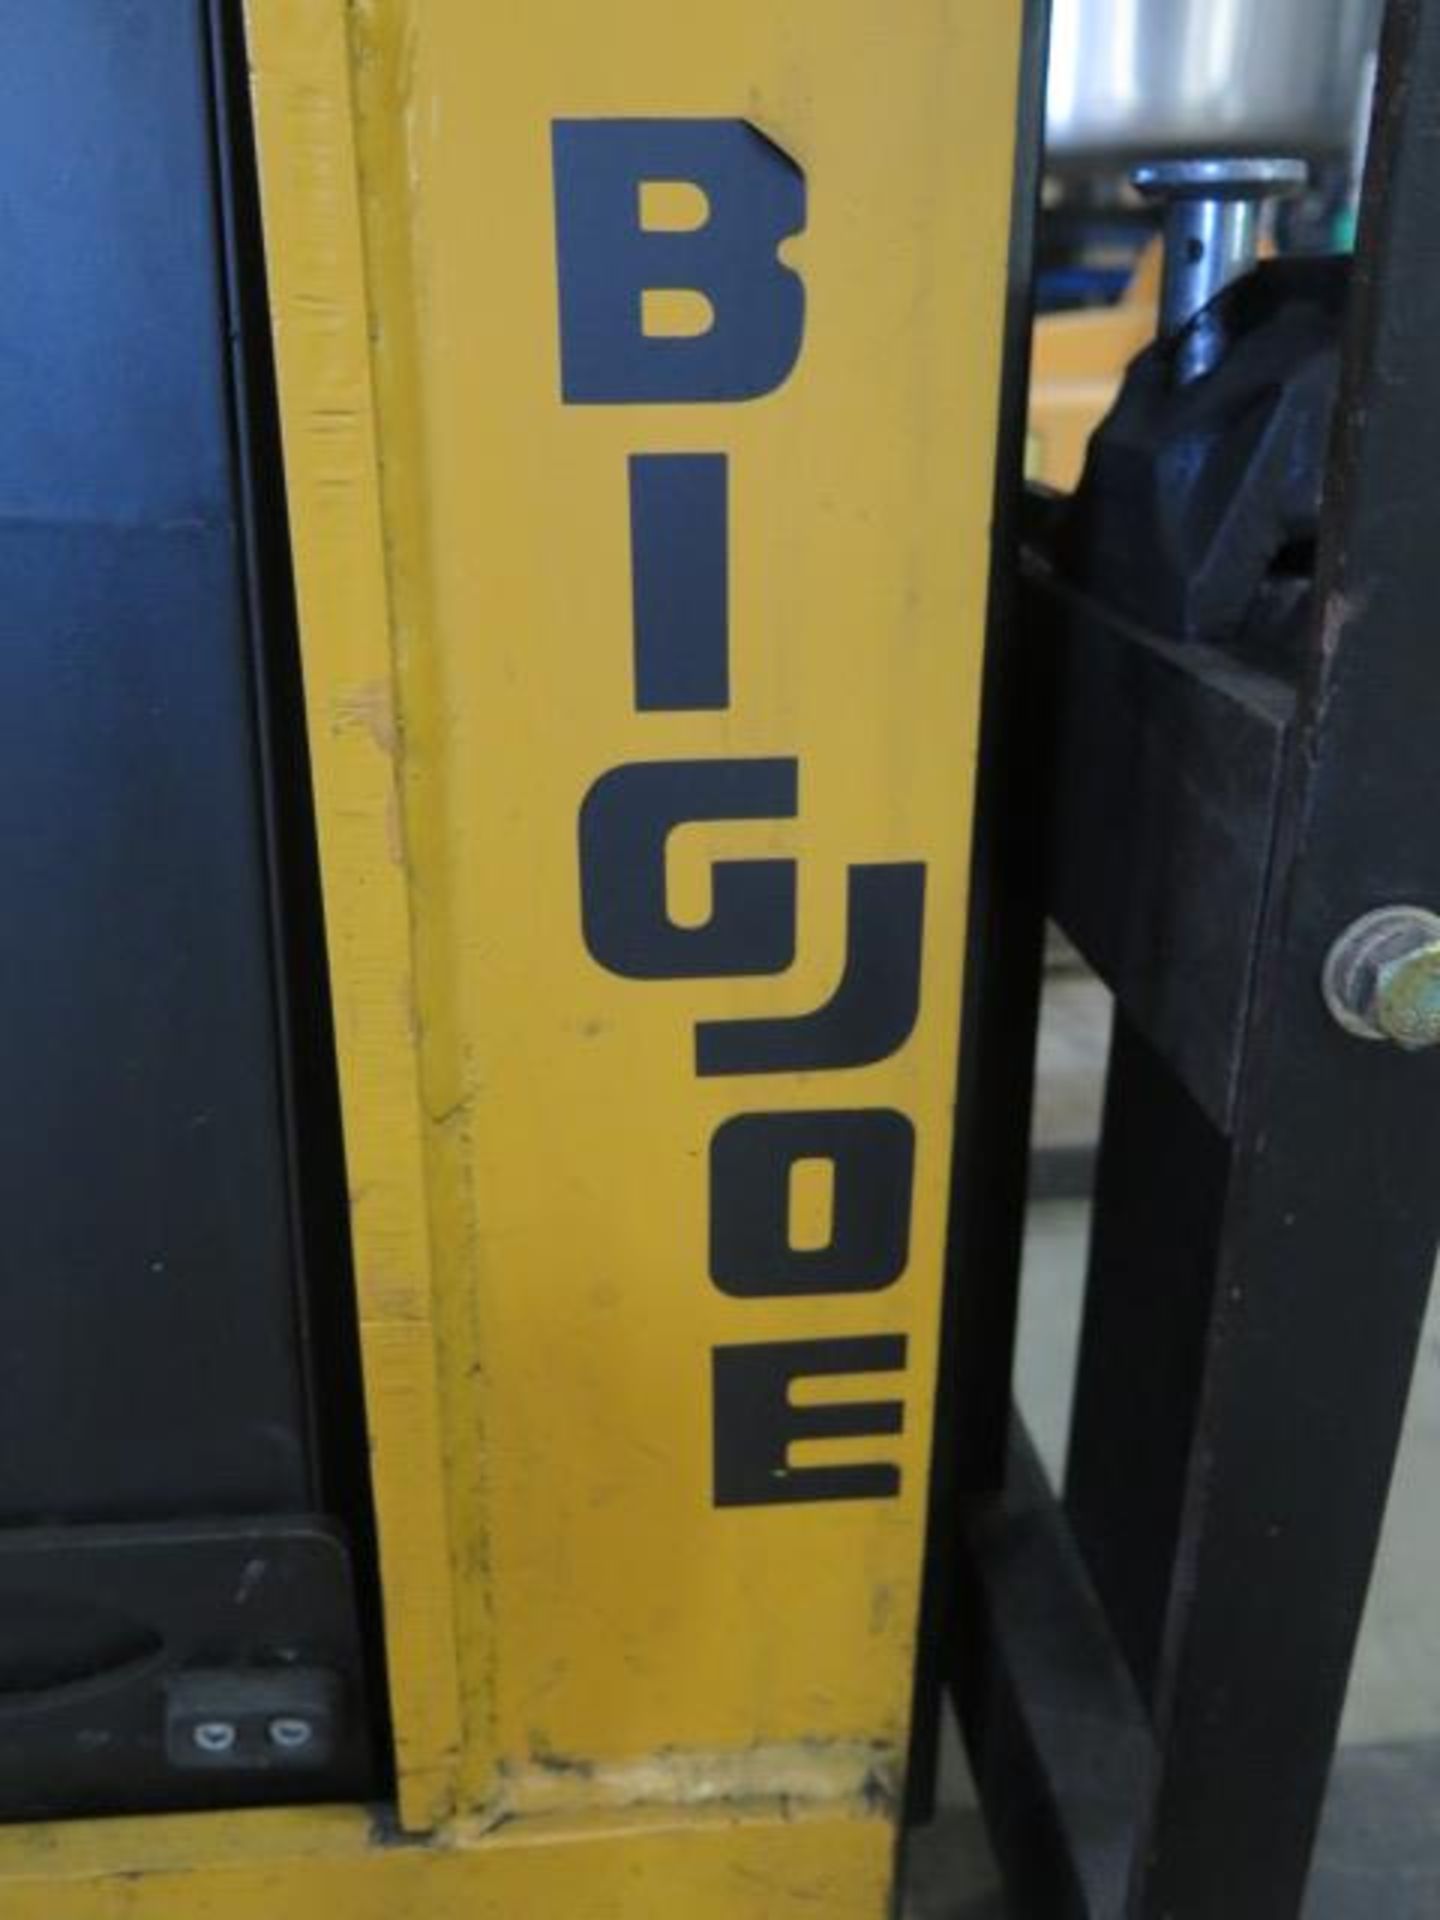 Big Joe PDS-25-150 2500 Lb Walk-Behind Electric Pallet Mover s/n S294052 w/ 130” Lift SOLD AS IS - Image 7 of 8